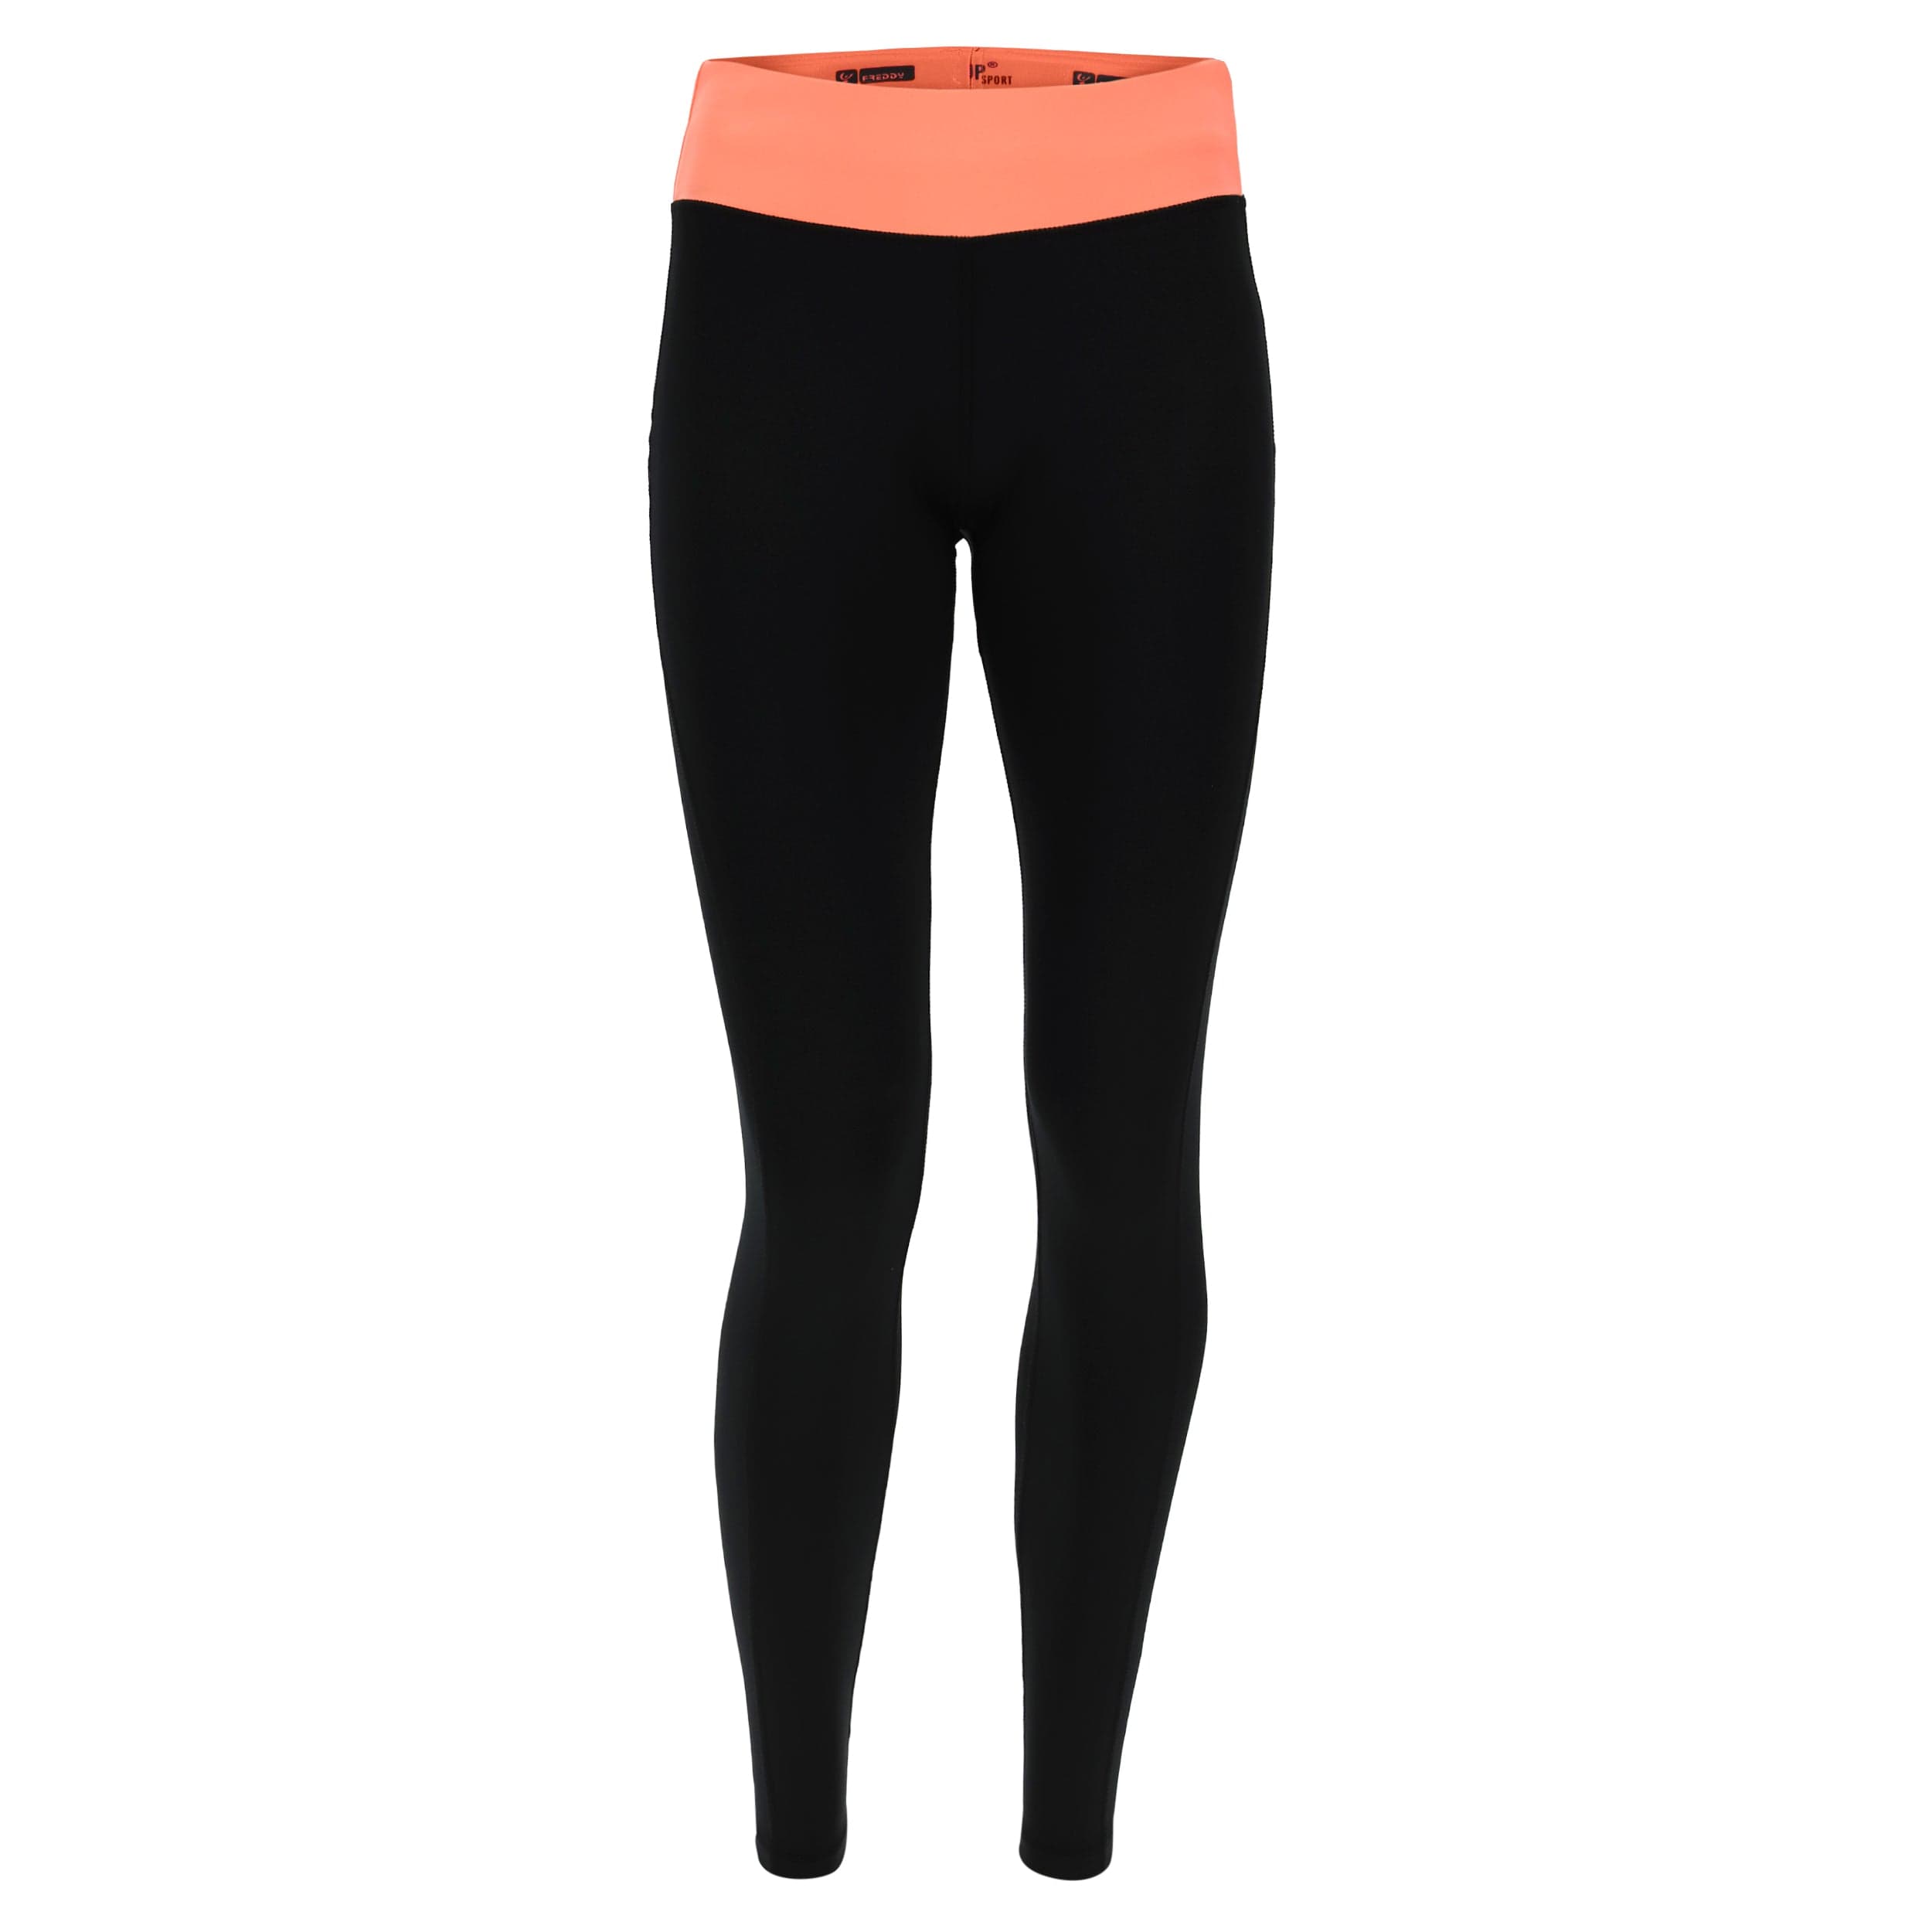 WR.UP® Sport - Mid Rise - Full length - Black + Coral 2